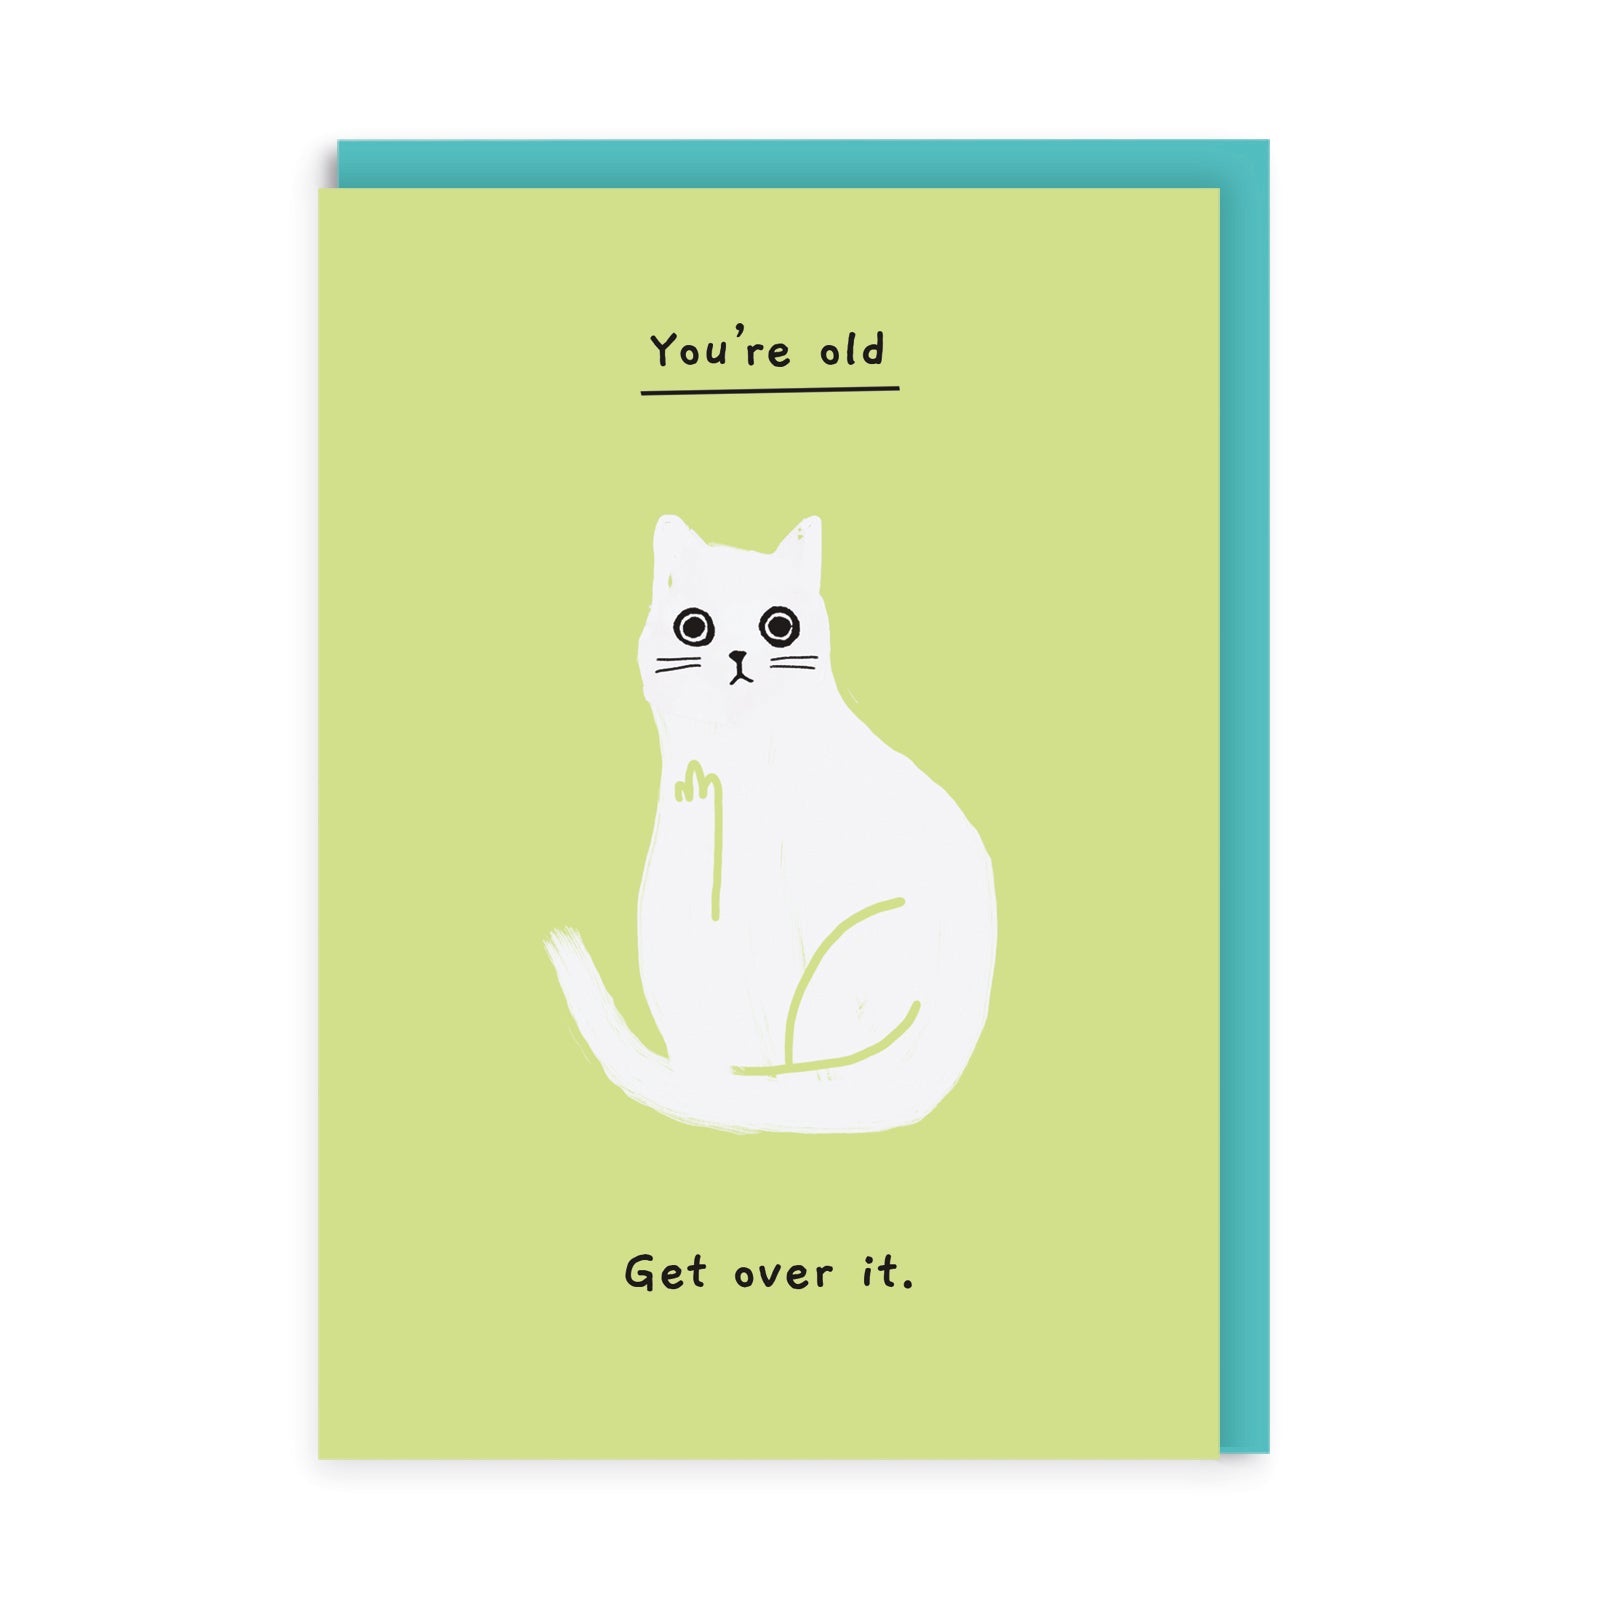 Green birthday card with a cartoon cat sticking its middle finger up. Text reads You're Old, Get Over It